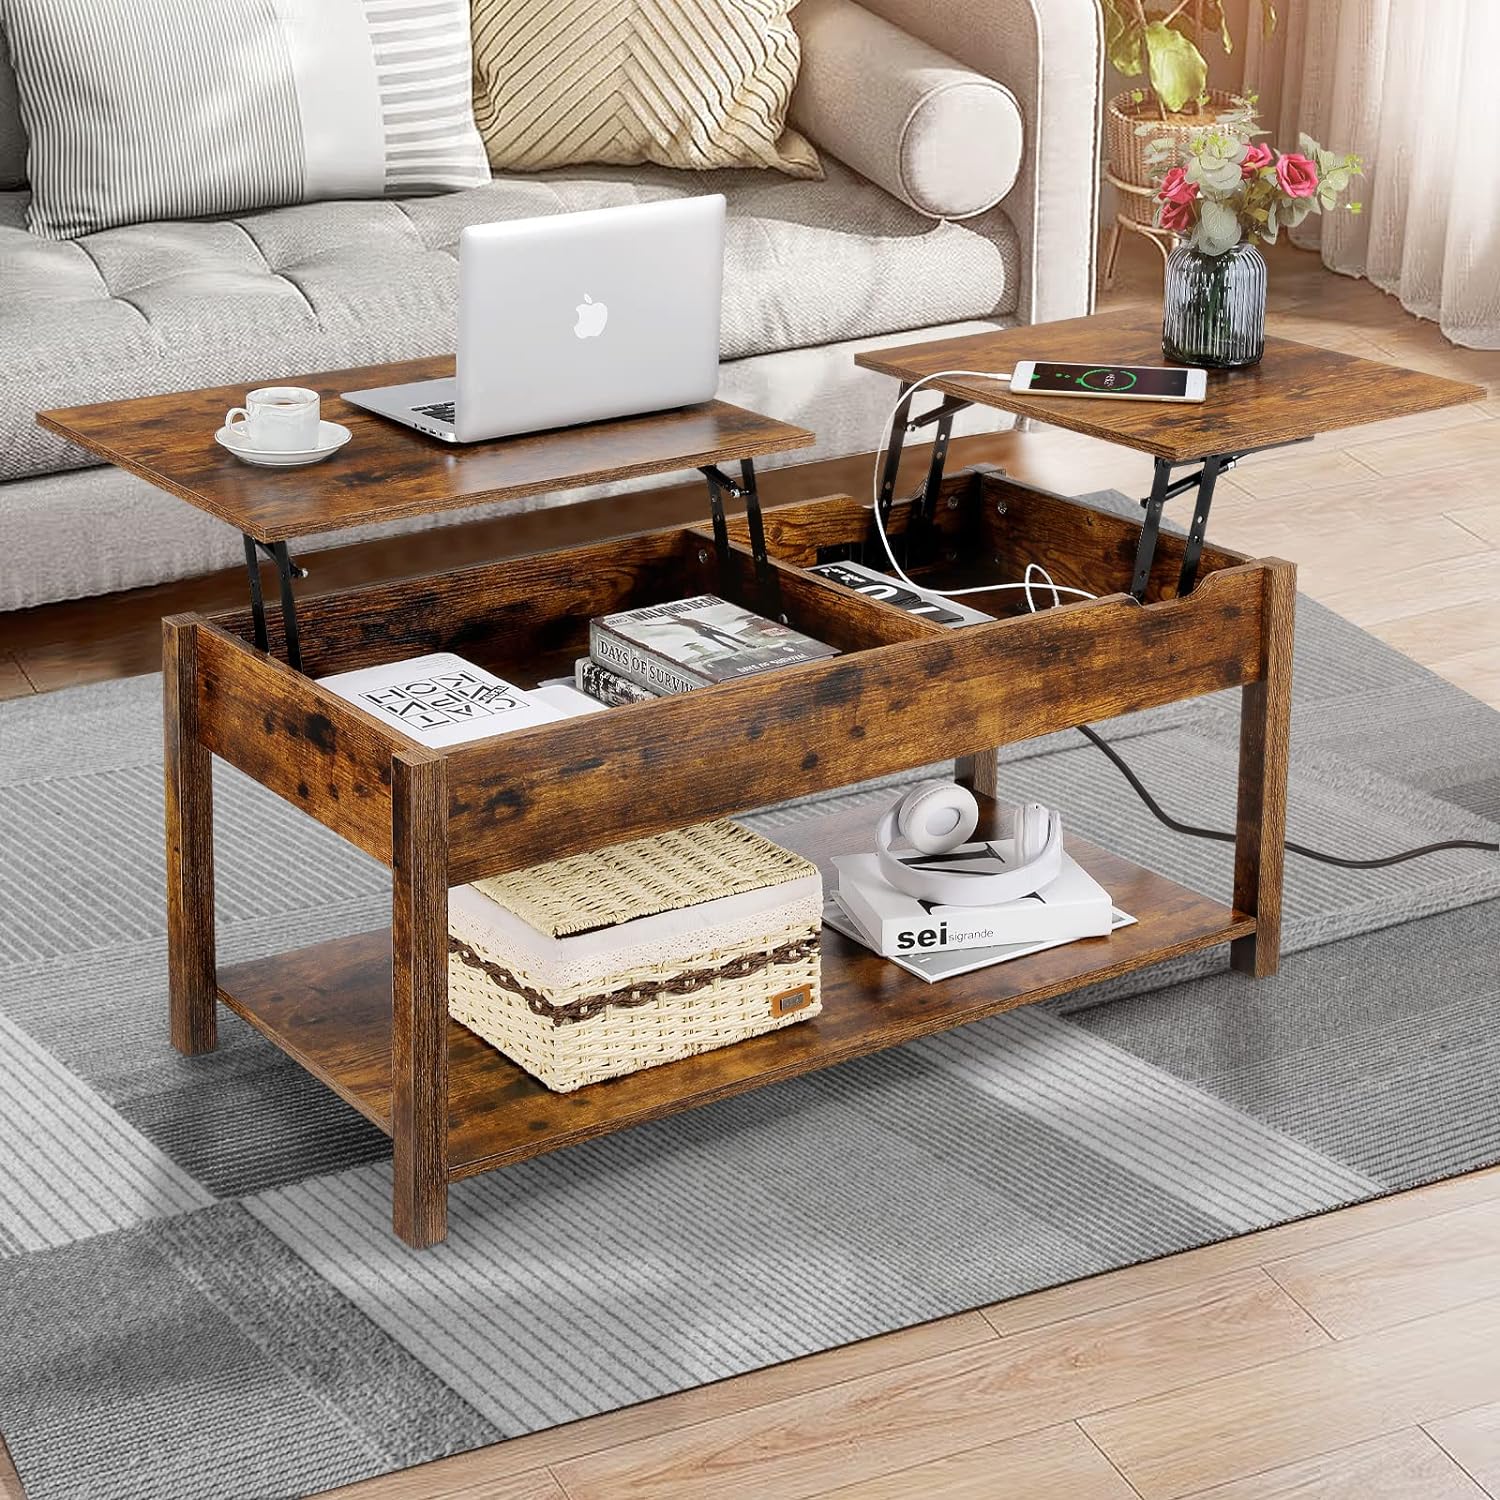 Likein 42.5" Lift Top Coffee Table with Charging Station, 2 Way Lift Tabletop Center Table for Living Room, Farmhouse Wood Coffee Tables with Two-Way Lift Open Shelf (Rustic Brown)